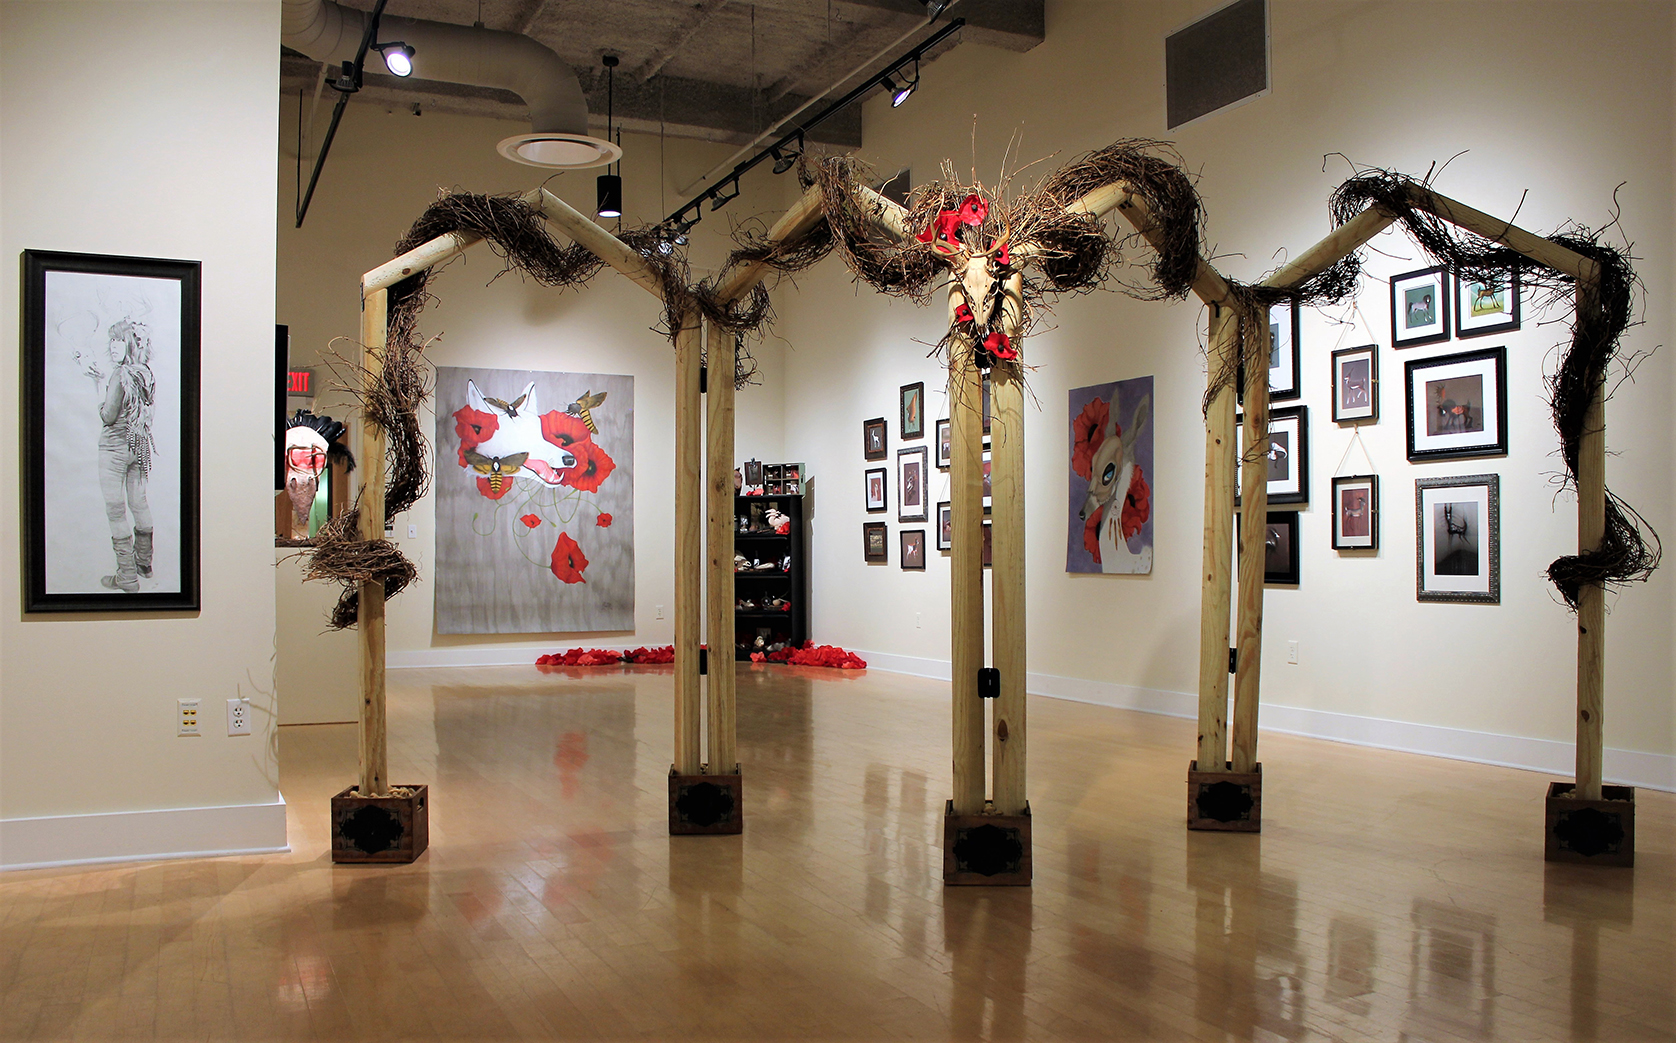  Installation at the Scarfone/Hartley Gallery during the HUMANATURE University of Tampa Arts Senior Exhibition. 